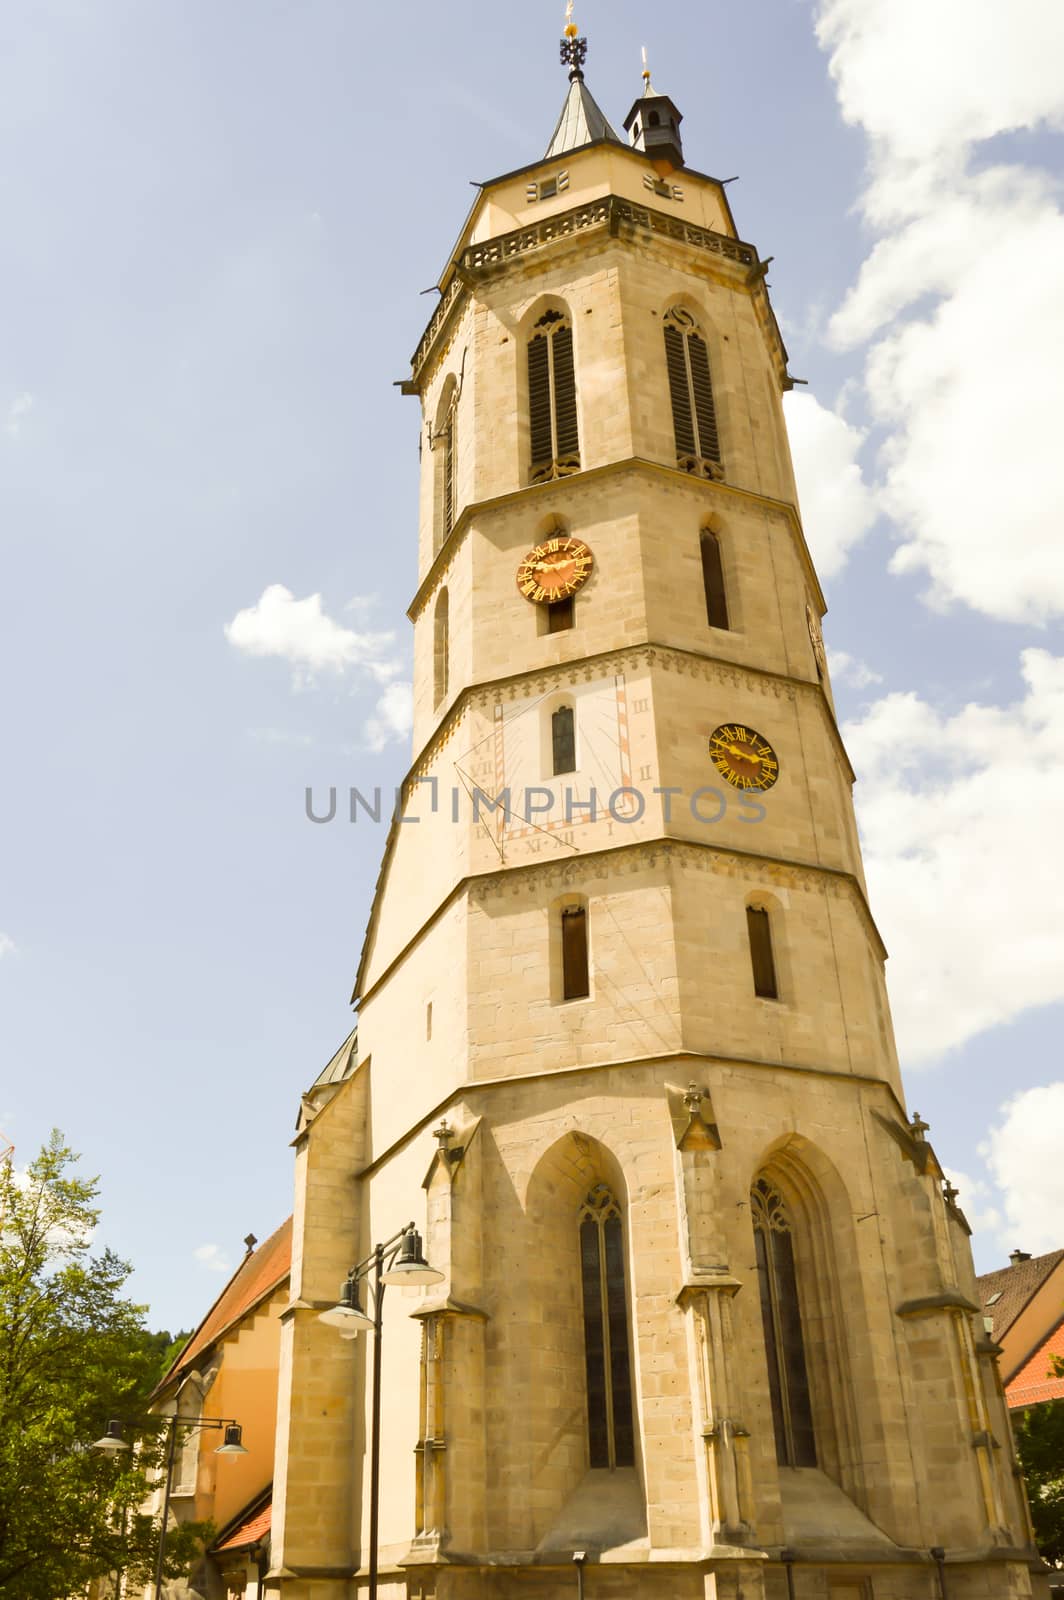 Superb tower of an old stone church in a German village